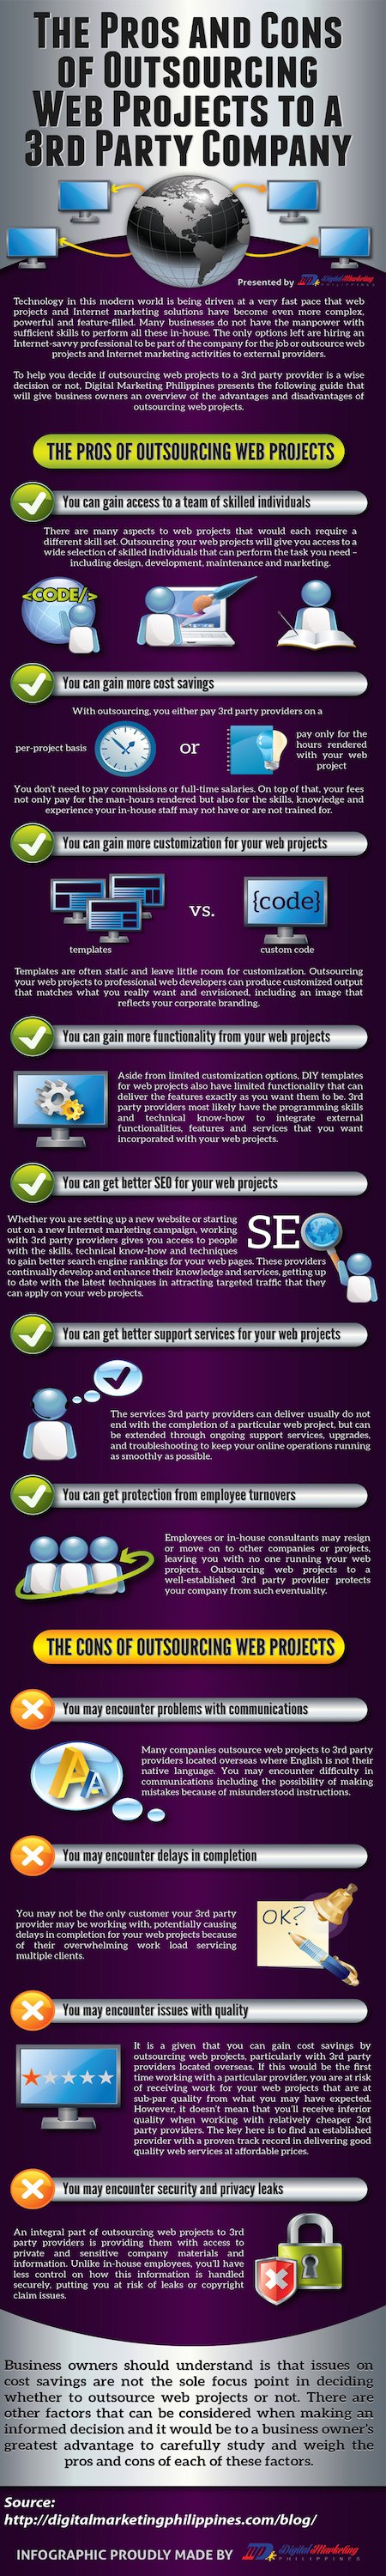 The-Pros-and-Cons-of-Outsourcing-Web-Projects-to-a-3rd-Party-Company